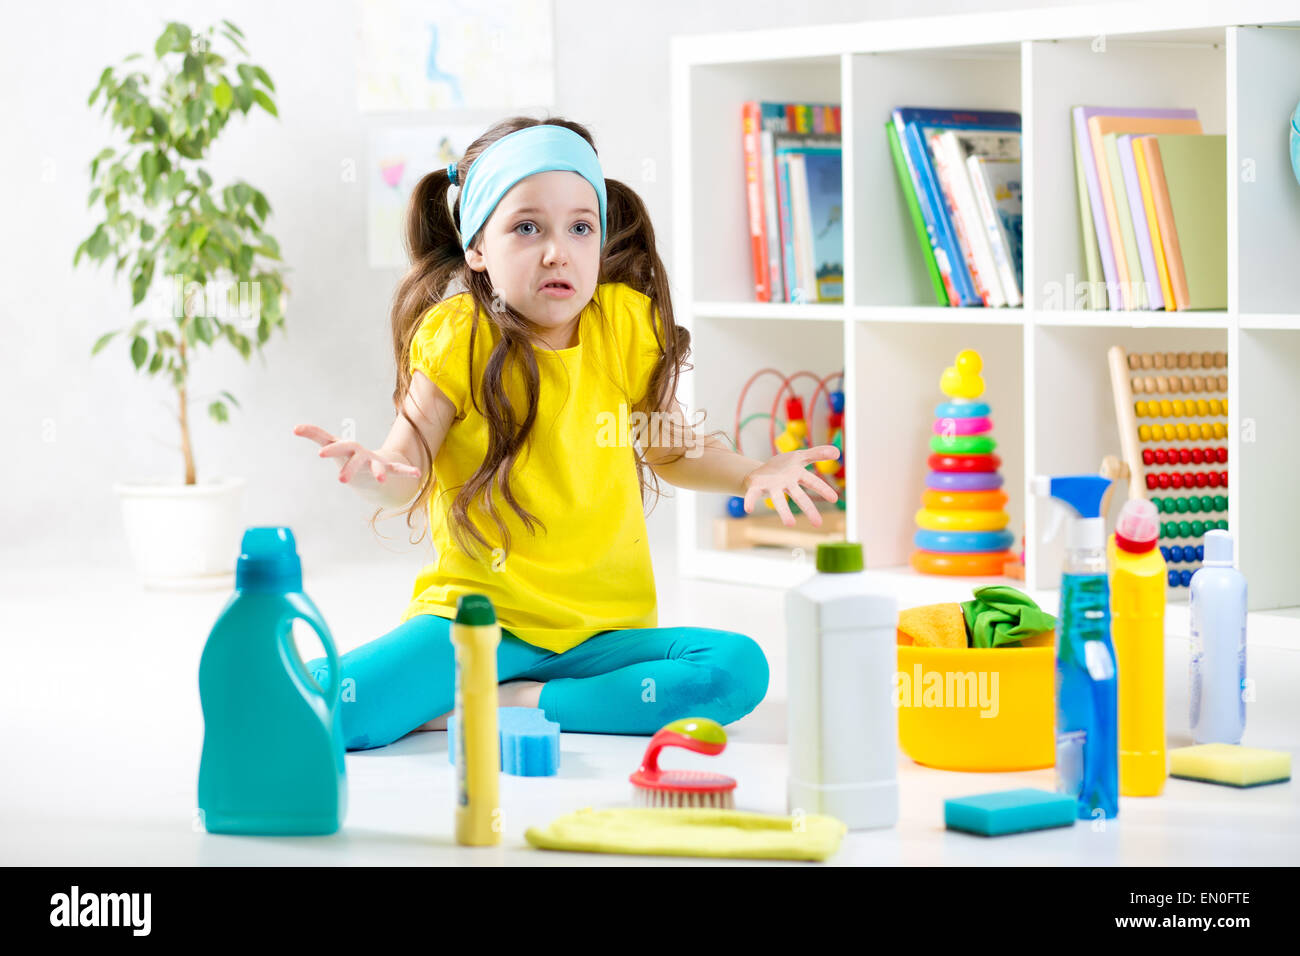 Frustrated kid girl sitting on floor with cleaning tools Stock Photo